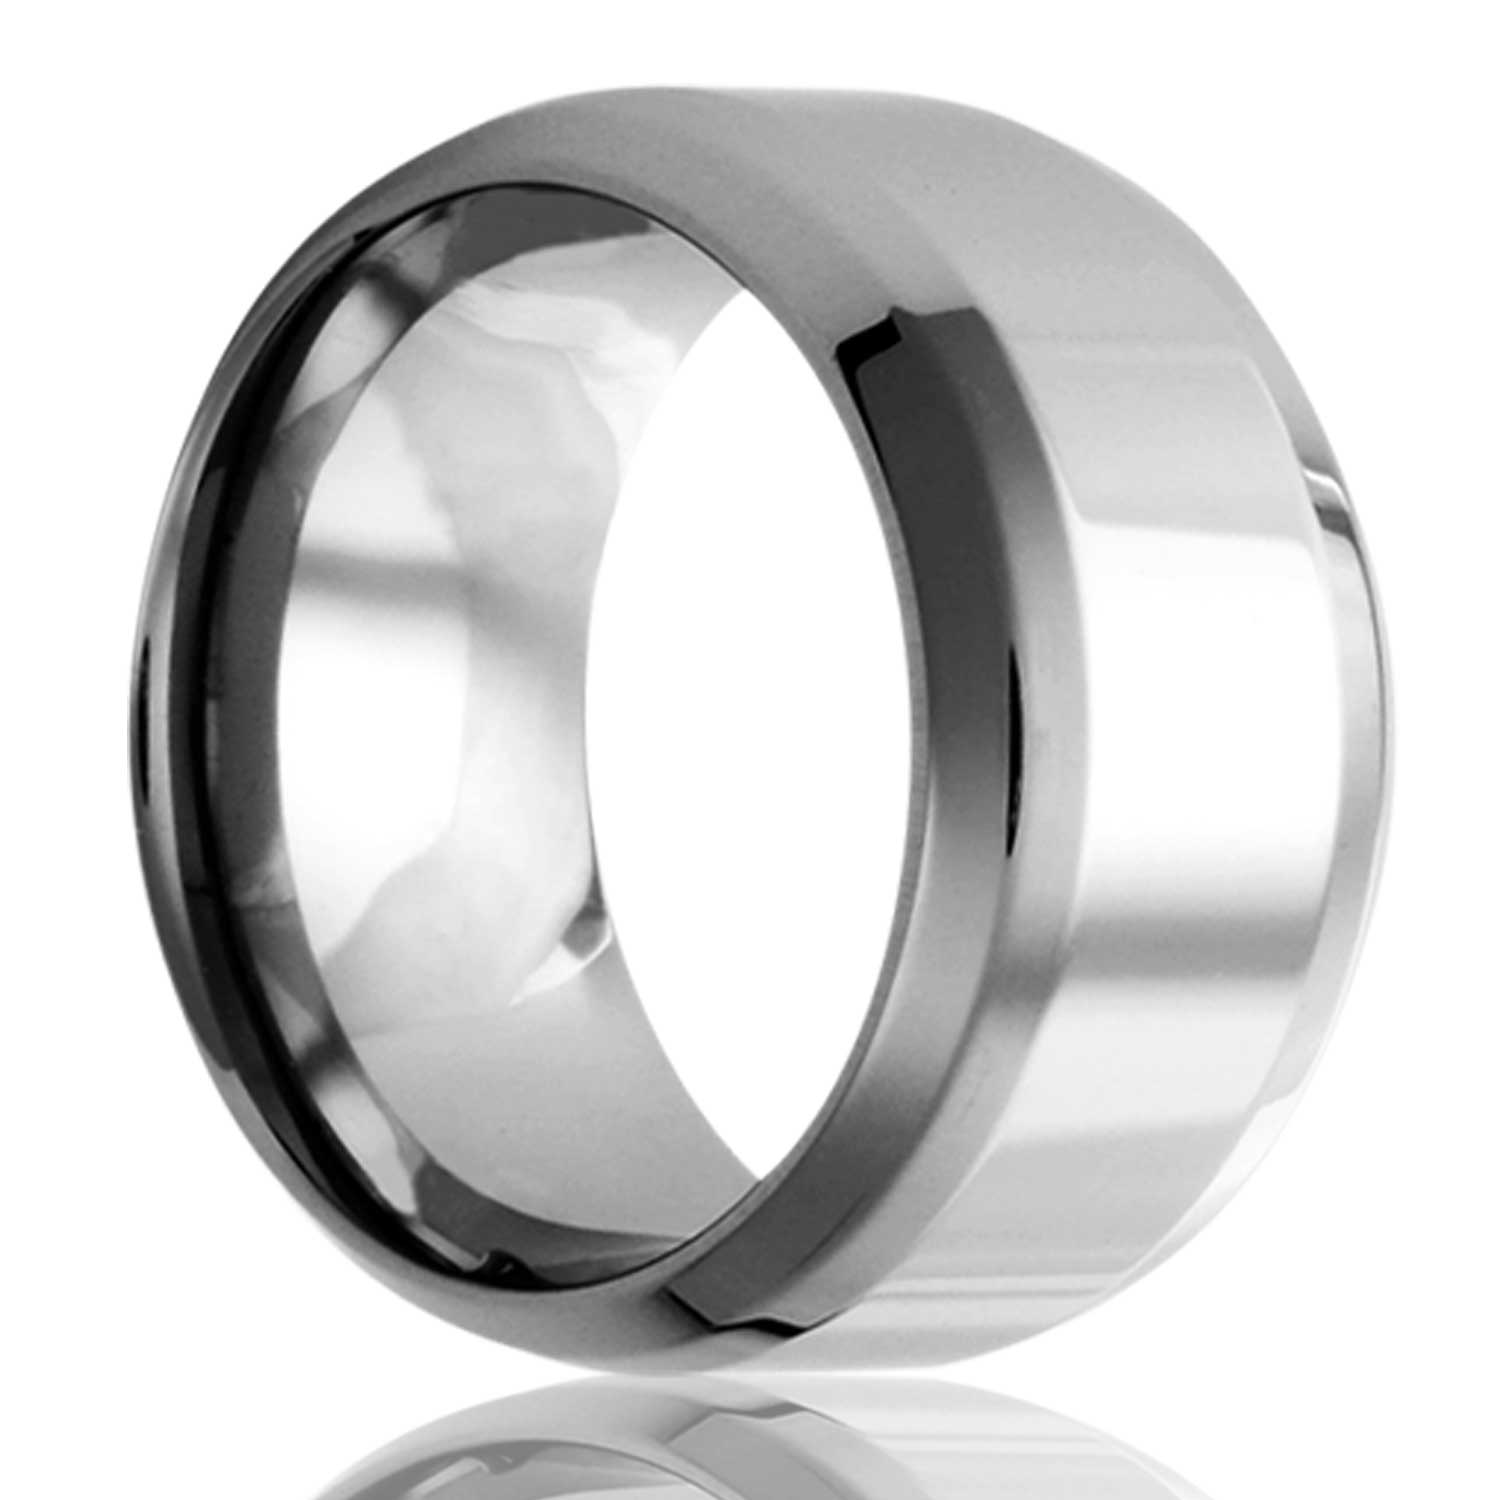 A beveled edges tungsten wedding band displayed on a neutral white background.